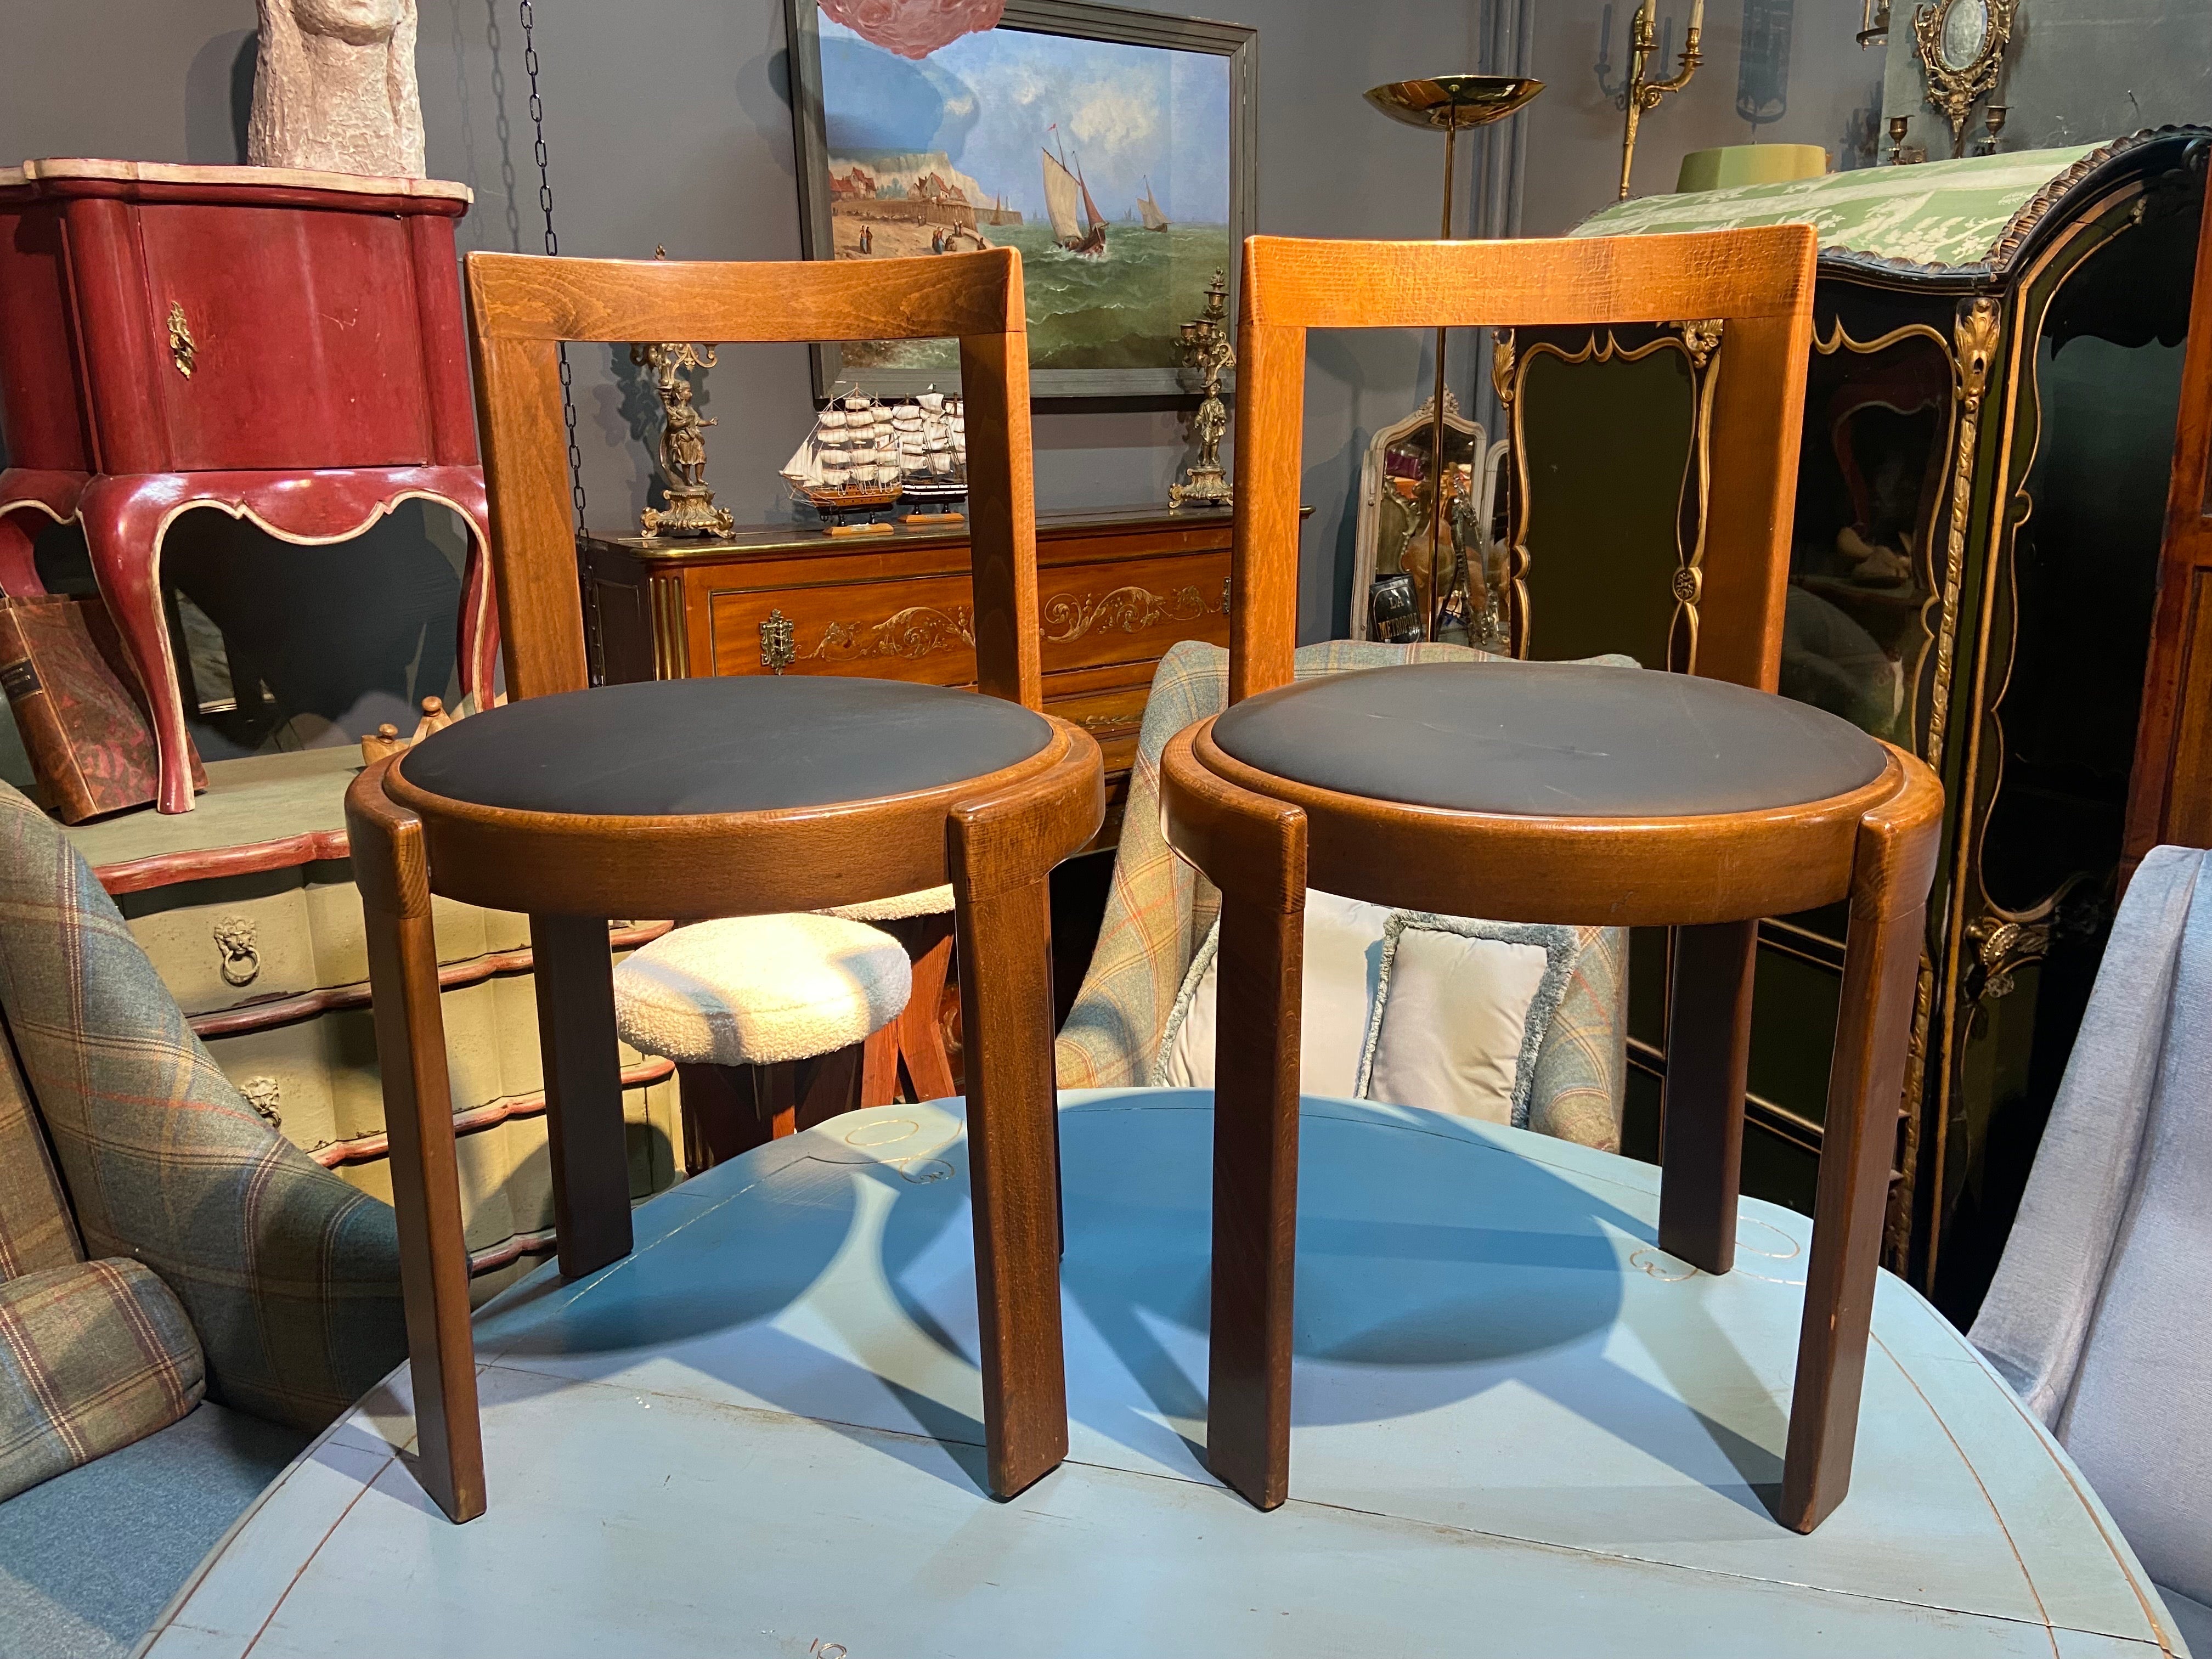 Two Italian vintage round chairs made of natural hand carved wood in very elegant shape and good authentic condition with seats upholstered in black leather.
Italy, circa 1950.